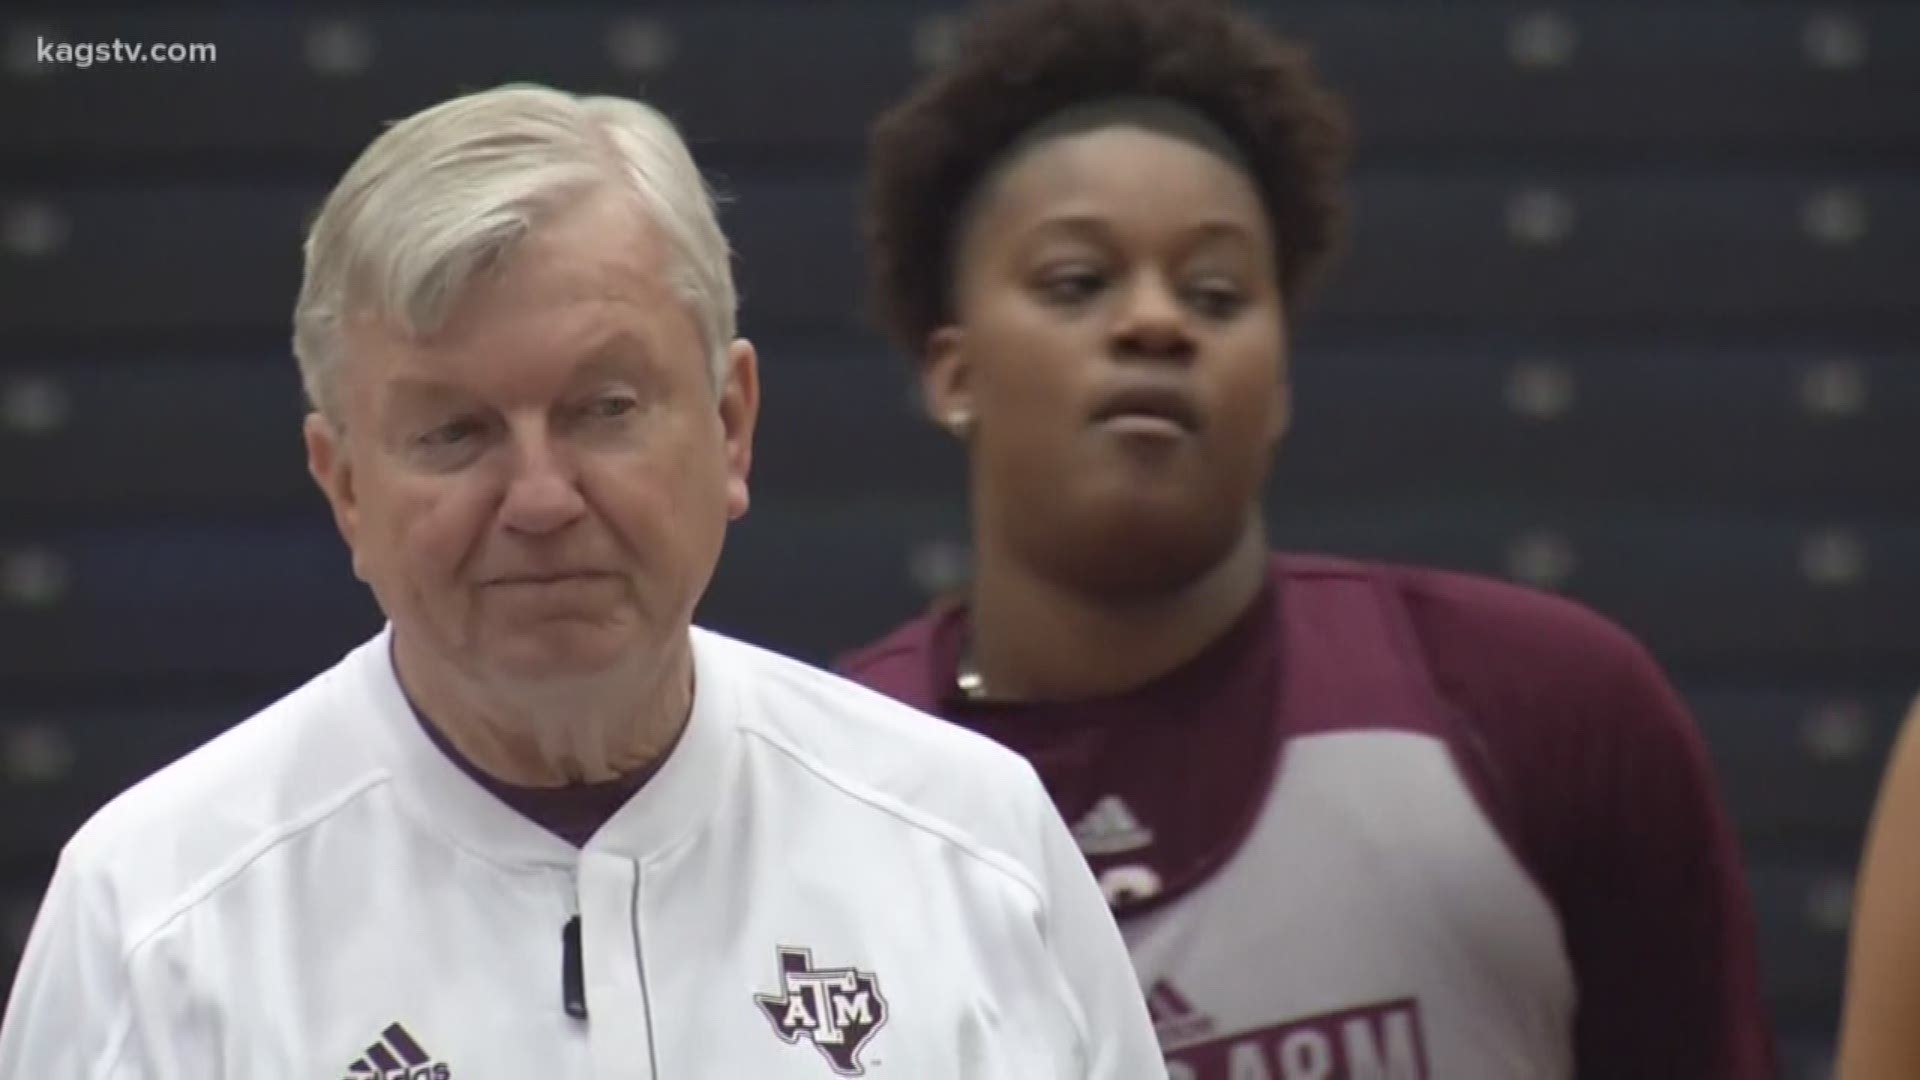 Texas A&M is the only team still standing in the women's NCAA Tournament to start four underclassmen. The Aggies though have a Hall of Fame coach that's won a national championship. We'll see if the combination of youth on the court and veteran on the sidelines can work one more time against Notre Dame.